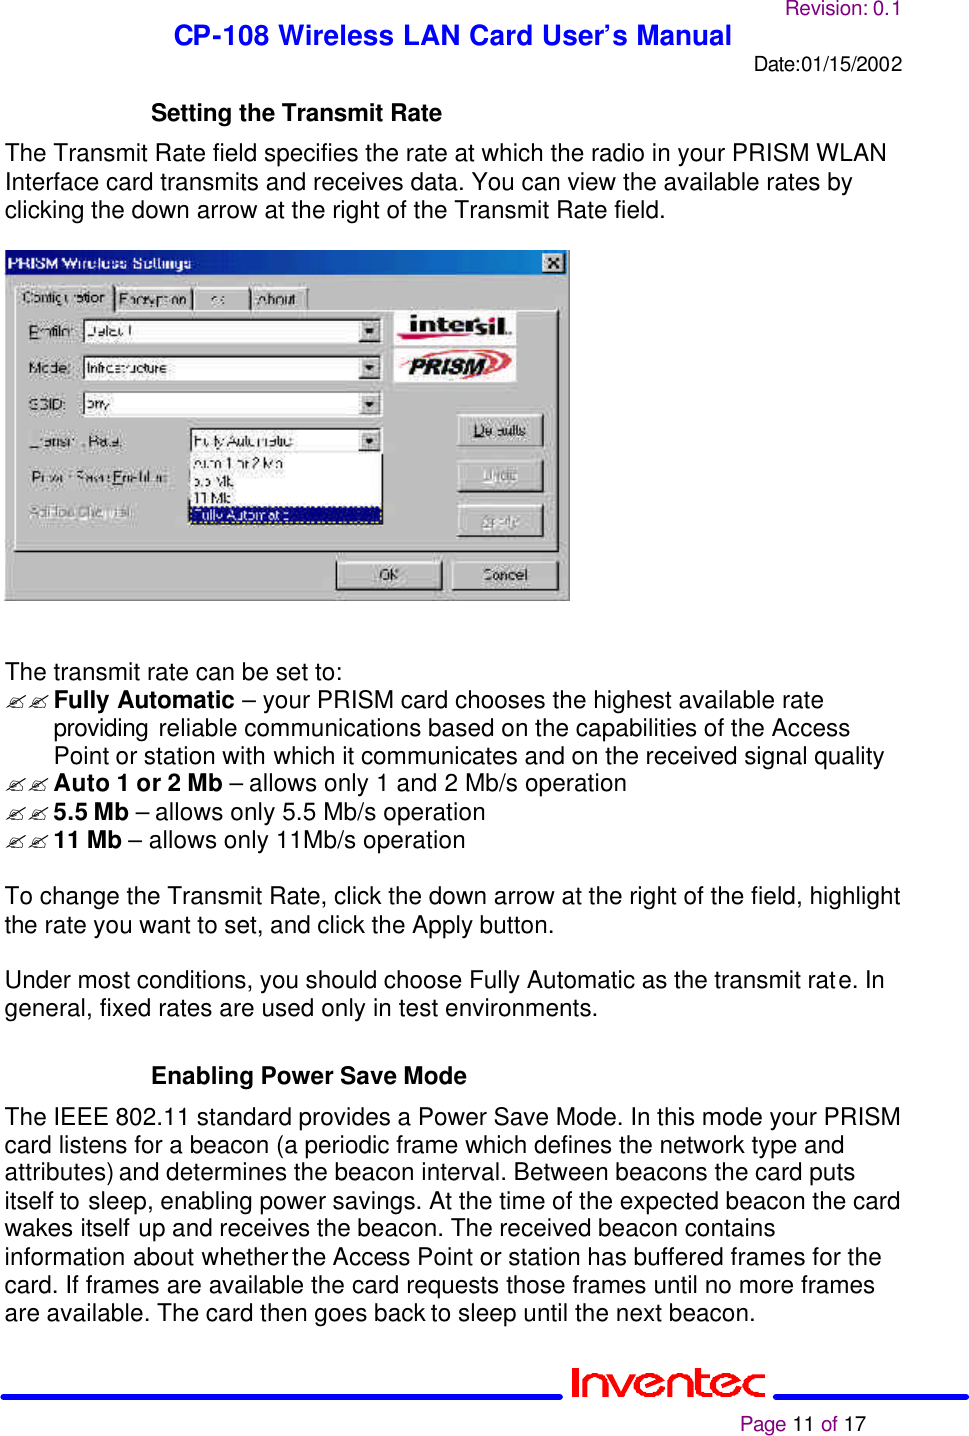 Revision: 0.1 CP-108 Wireless LAN Card User’s Manual Date:01/15/2002                                                                                                                                                             Page 11 of 17  Setting the Transmit Rate The Transmit Rate field specifies the rate at which the radio in your PRISM WLAN Interface card transmits and receives data. You can view the available rates by clicking the down arrow at the right of the Transmit Rate field.     The transmit rate can be set to: ?? Fully Automatic – your PRISM card chooses the highest available rate providing reliable communications based on the capabilities of the Access Point or station with which it communicates and on the received signal quality ?? Auto 1 or 2 Mb – allows only 1 and 2 Mb/s operation ?? 5.5 Mb – allows only 5.5 Mb/s operation ?? 11 Mb – allows only 11Mb/s operation  To change the Transmit Rate, click the down arrow at the right of the field, highlight the rate you want to set, and click the Apply button.  Under most conditions, you should choose Fully Automatic as the transmit rate. In general, fixed rates are used only in test environments.  Enabling Power Save Mode The IEEE 802.11 standard provides a Power Save Mode. In this mode your PRISM card listens for a beacon (a periodic frame which defines the network type and attributes) and determines the beacon interval. Between beacons the card puts itself to sleep, enabling power savings. At the time of the expected beacon the card wakes itself up and receives the beacon. The received beacon contains information about whether the Access Point or station has buffered frames for the card. If frames are available the card requests those frames until no more frames are available. The card then goes back to sleep until the next beacon.  